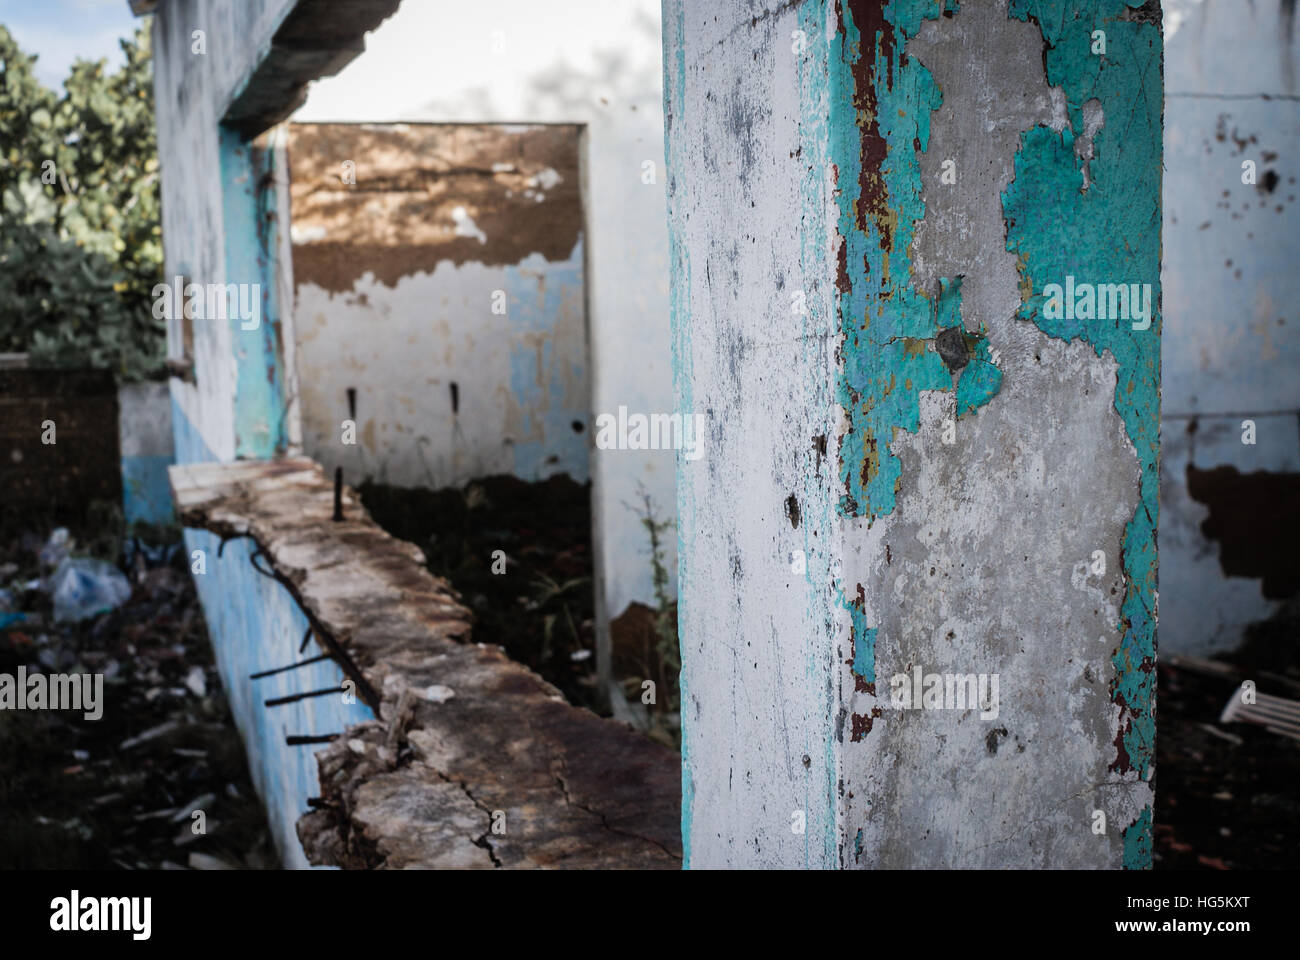 Details of ruins of an abandoned and worn out house. Stock Photo